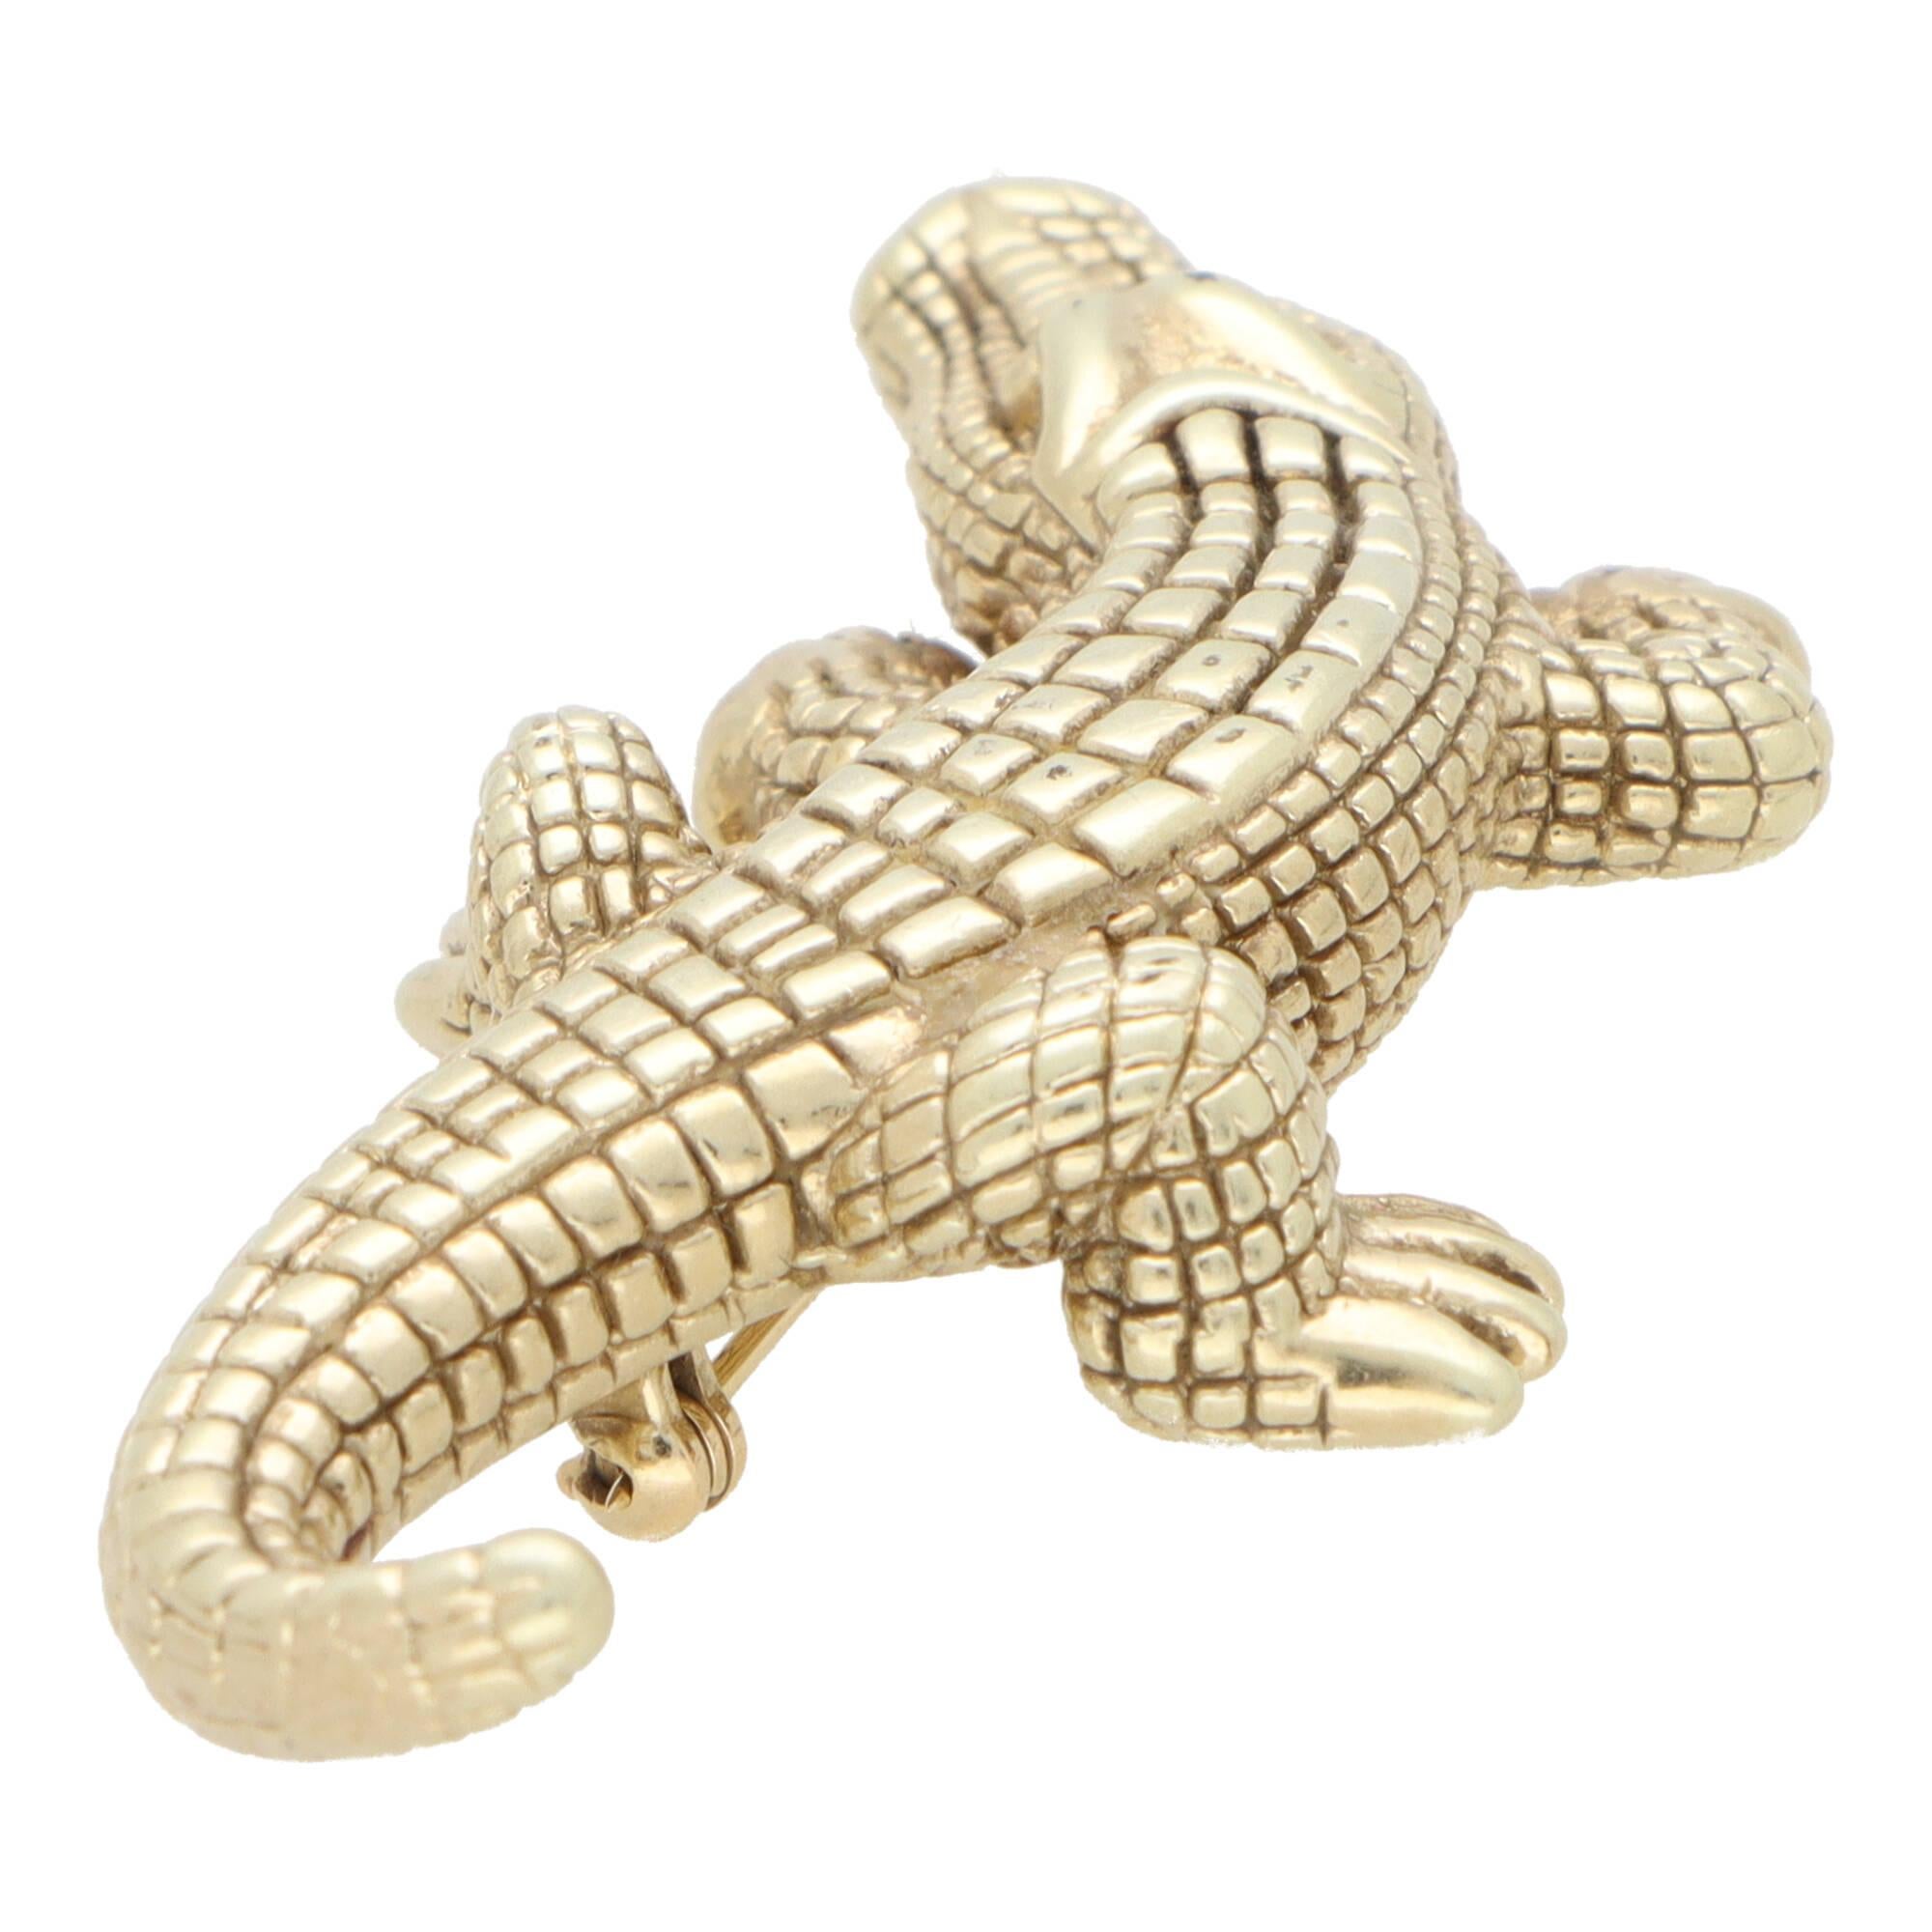 A beautiful vintage crocodile brooch set in 14k yellow gold.

The brooch is composed of a heavily detailed crocodile and is design to clamber up/down the wearers coat or jumper. The croc is secured to reverse with a long pin fitting.

Due to the